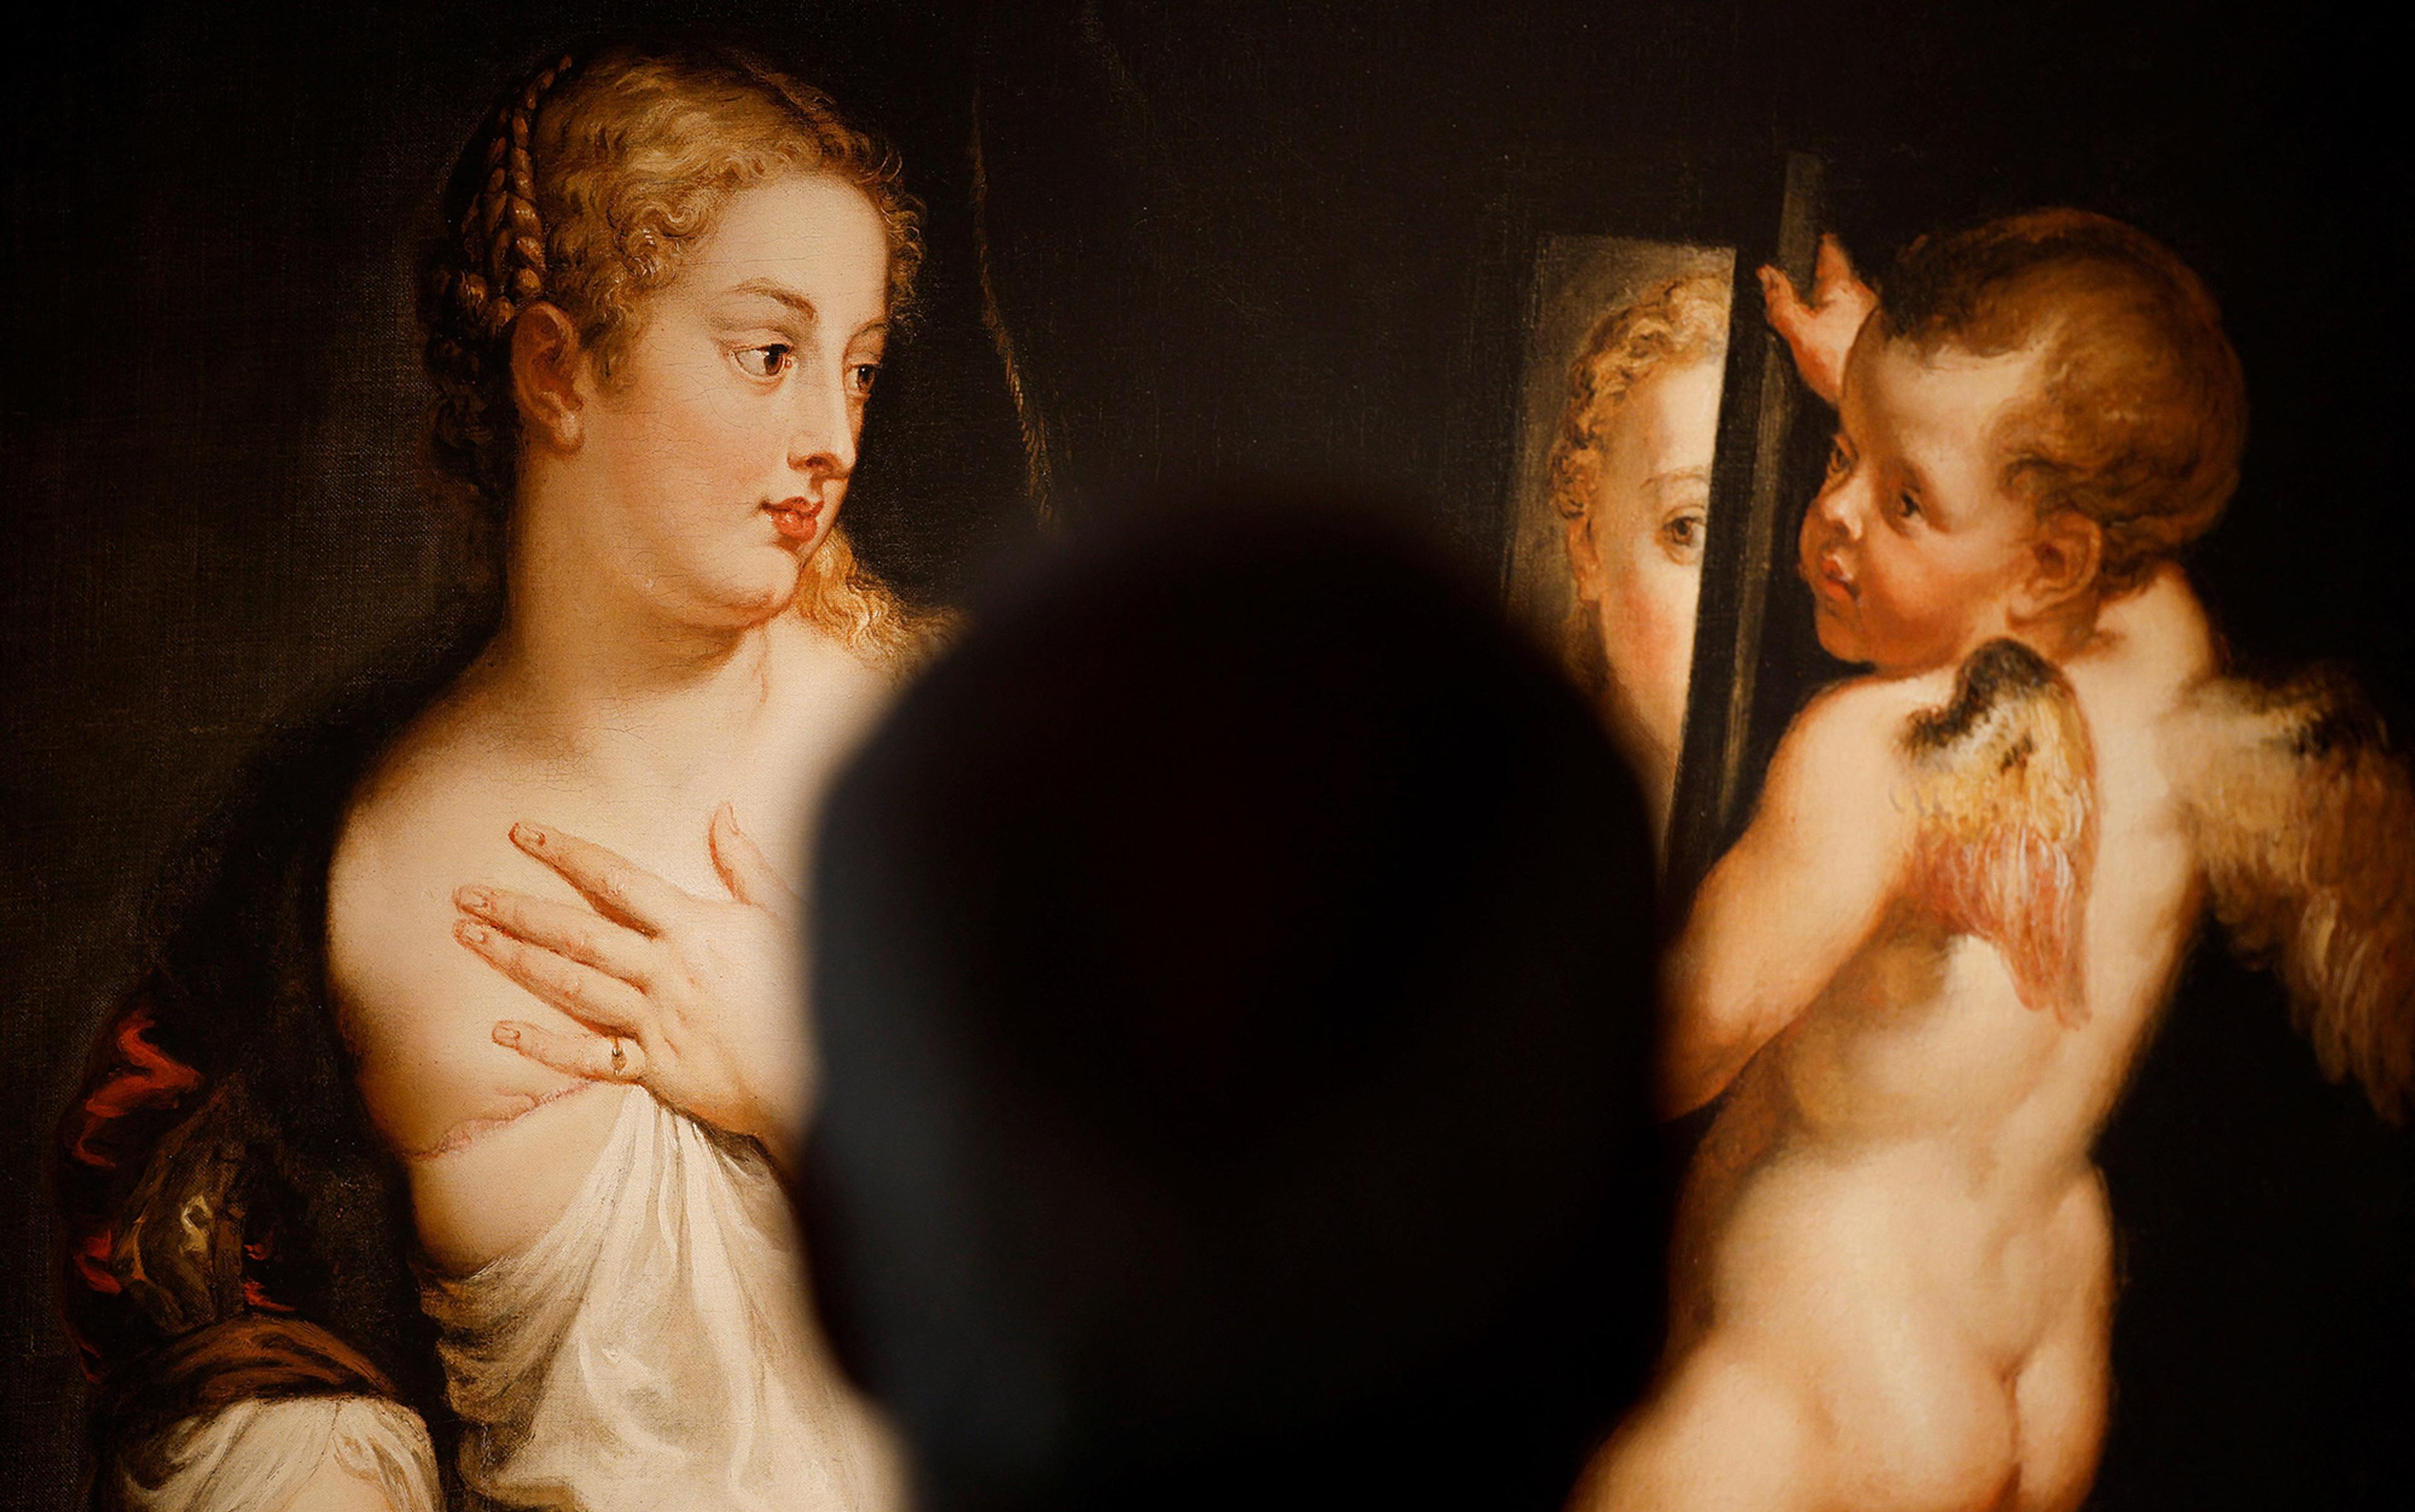 Rubens painting Venus and Cupid reimagined with Venus on the left gazing in a mirror at her mastectomized breast. A cherub like Cupid to the right holds the mirror